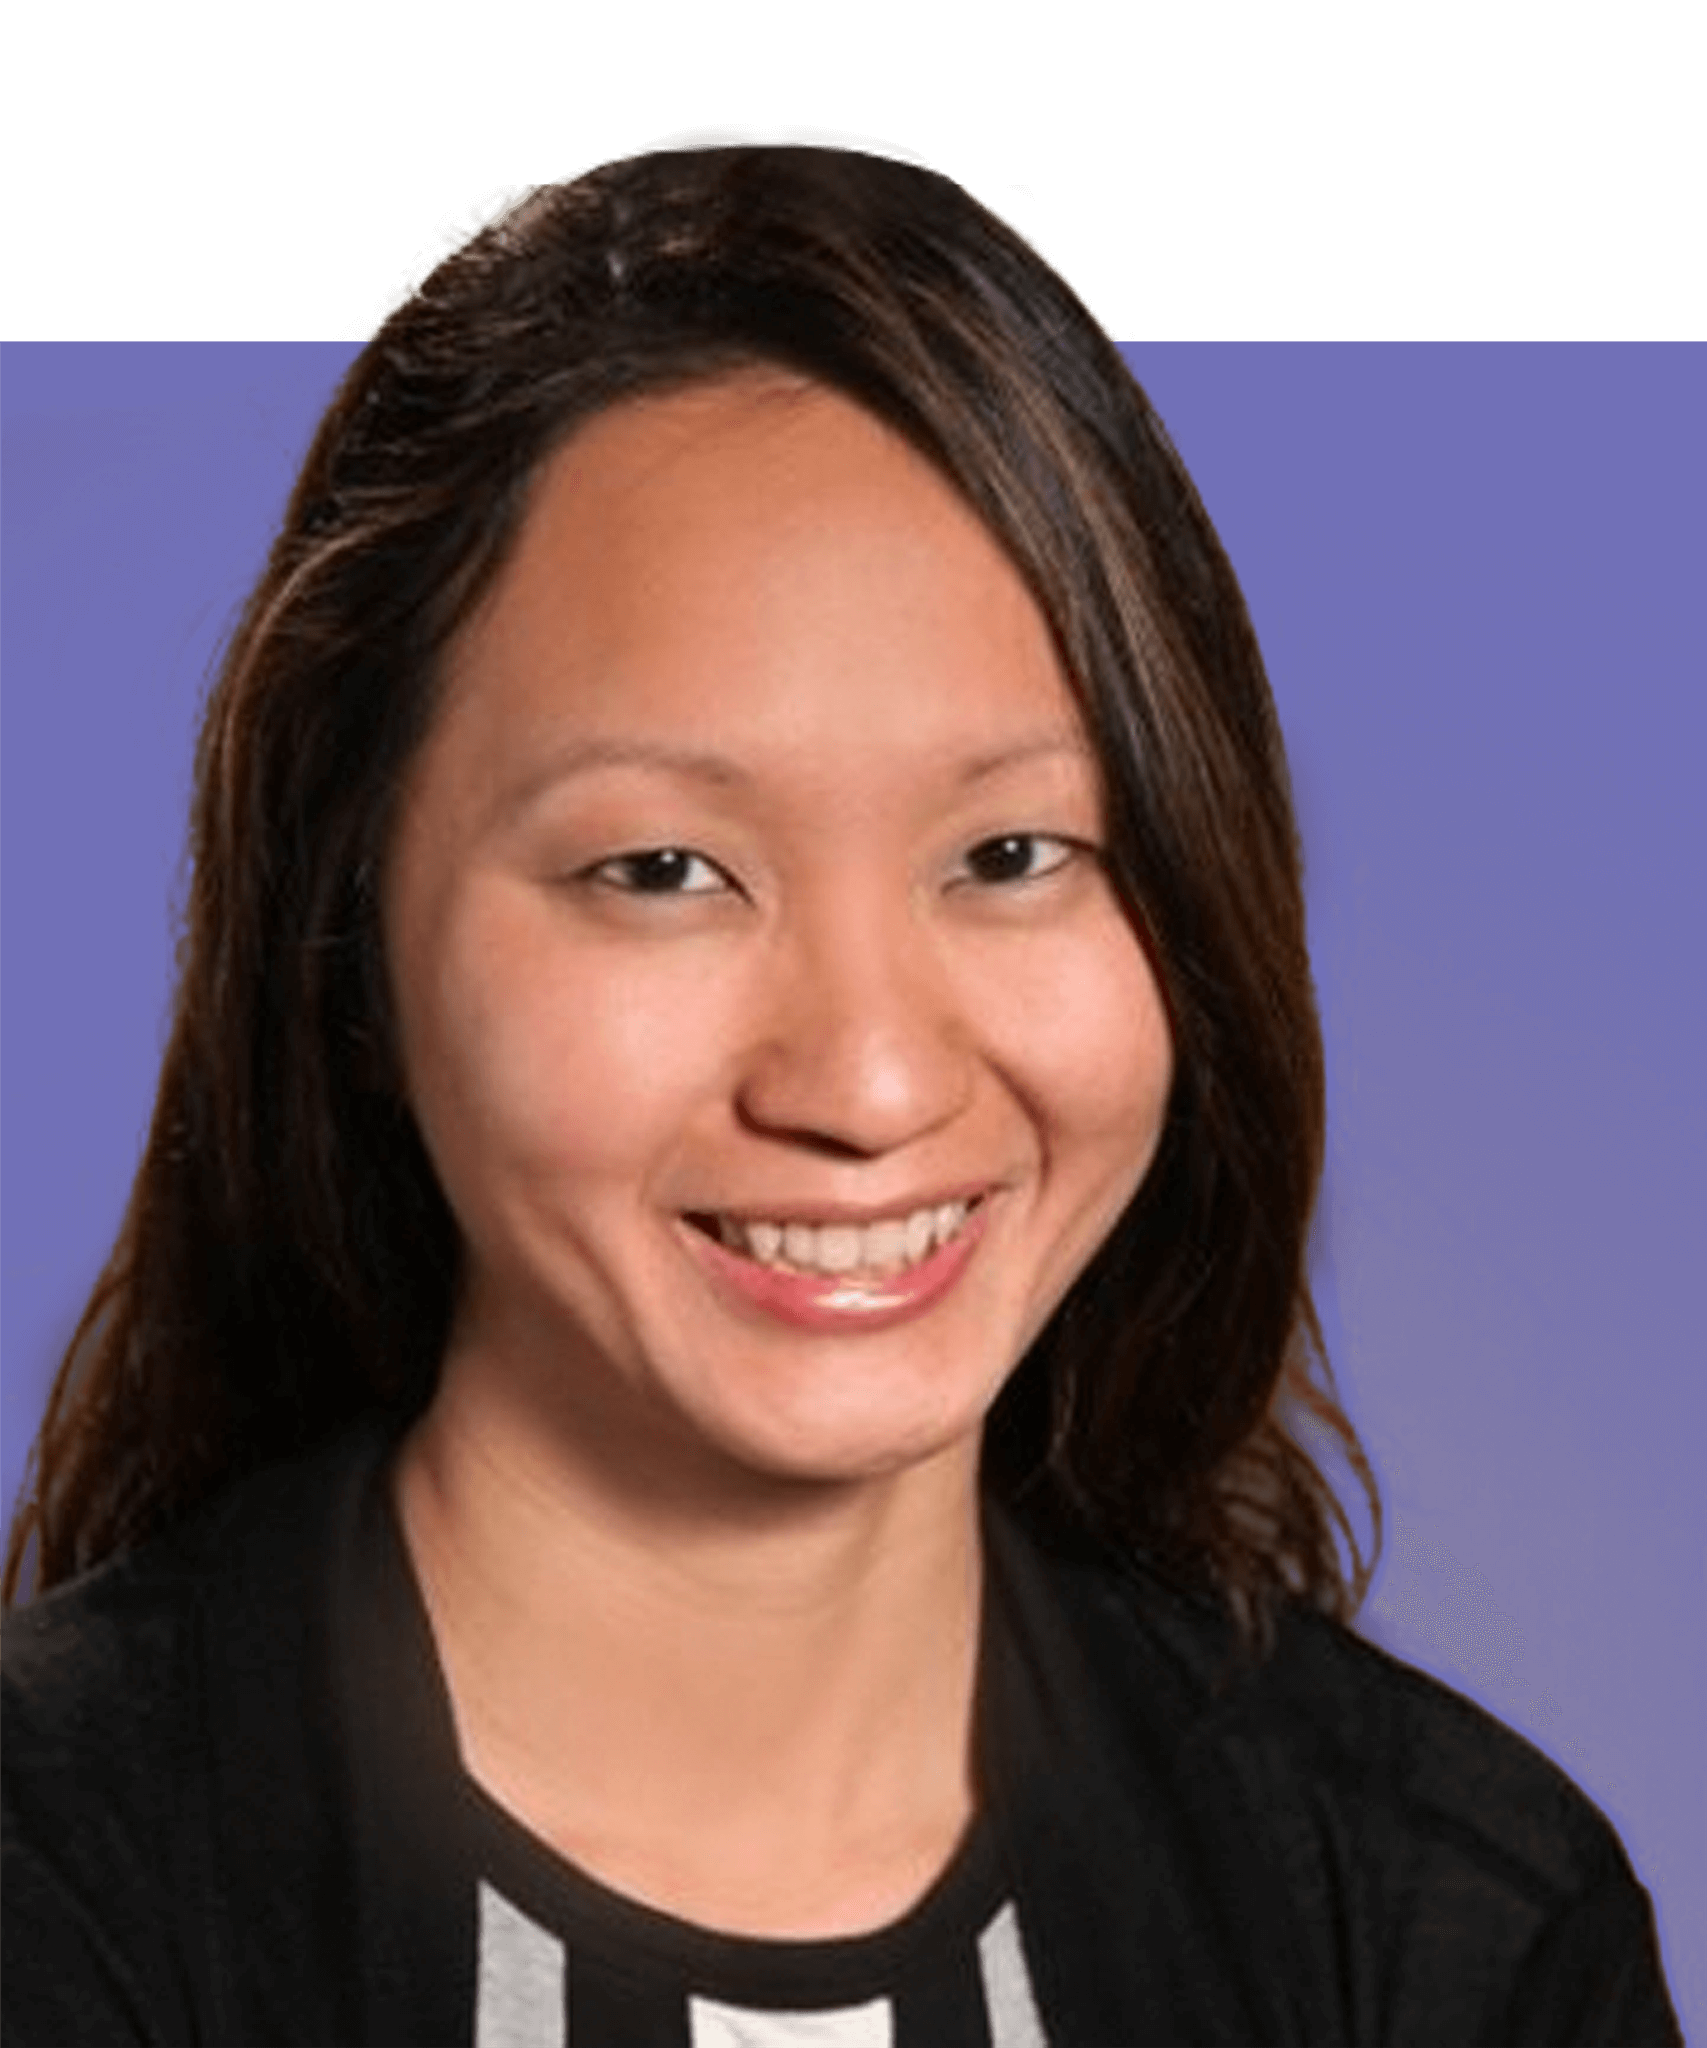 Head shot of North America Health lead Jacelyn Seng. She is an Asian woman with long dark hair and brown eyes. She is wearing a striped black top as she smiles at the camera.